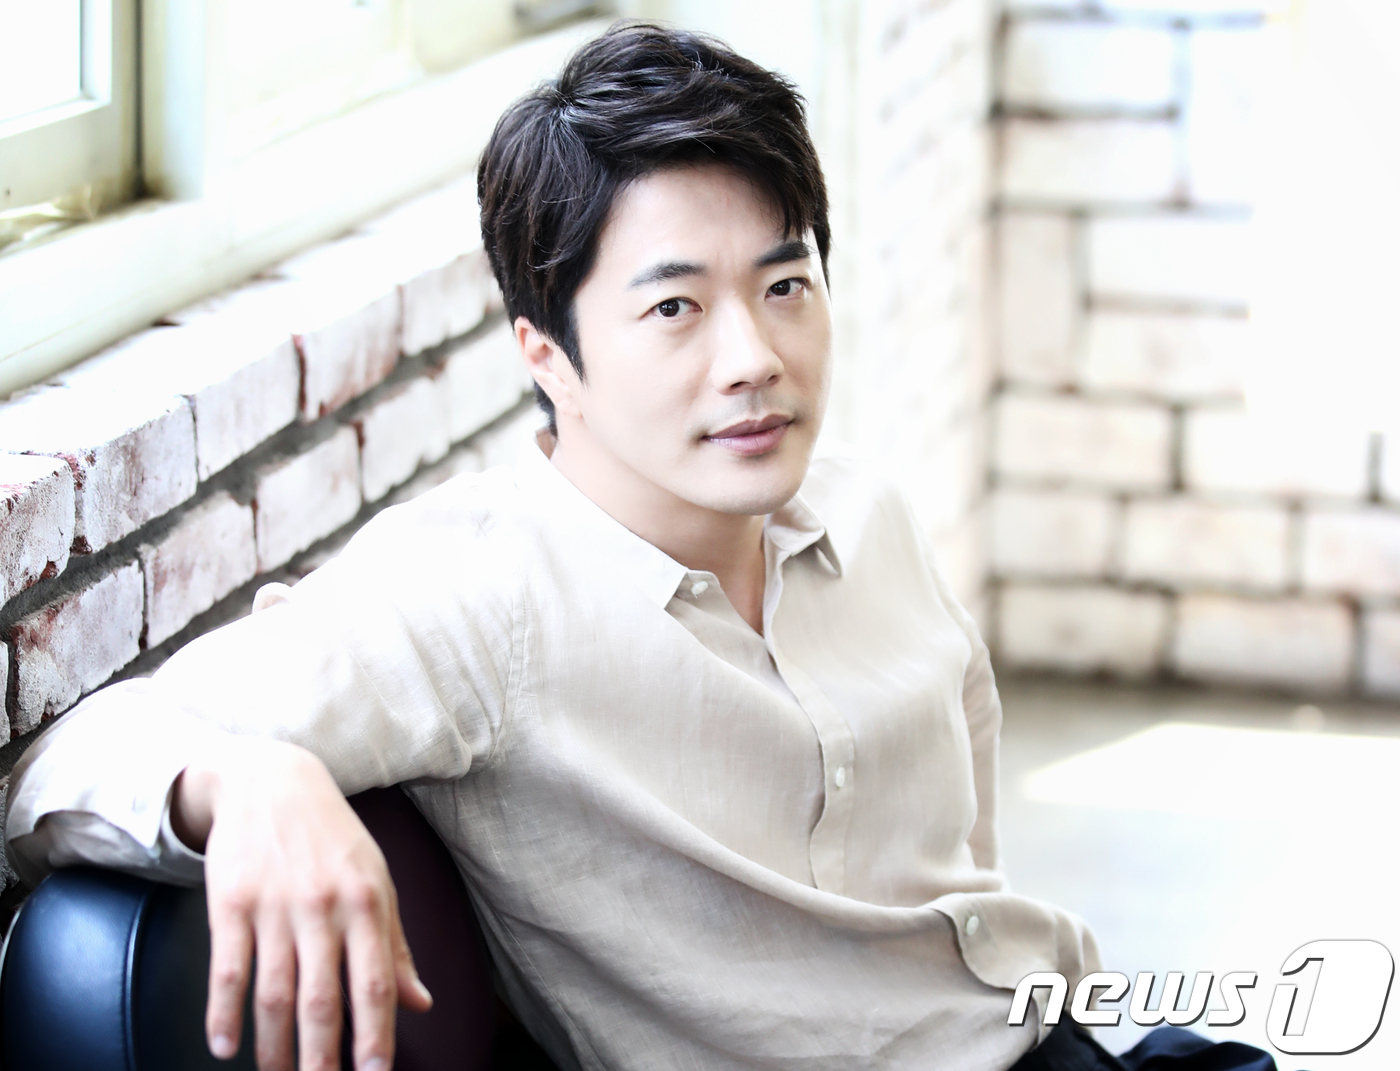 Kwon Sang-woo promised in an interview with a cafe in Samcheong-dong, Jongno-gu, Seoul on 31st, I will run on the screen to become the second Jung Woo-sung and the second Ha Jung-woo next year.The reason he is so attached to screen activity is because of the children.Kwon Sang-woo said: When (now) is an opportunity, lets find me, work hard when youre body and environment, thats the time, and I know that kids are also actors.Rockhee also came to play at the scene of Monk: The Bigginning and Monk: Returns - sometimes children hear about their dads, even if they dont say anything.I want to protect it to some extent, he said. I want to show that my dad is working hard and working hard. He also said he is going on his own way to draw a picture.The job of actor is not a car, and human beings are all old, and at some point I become a person who does not find people, and I am worried about such a time. I want to see my child grow up quickly and become a mature person, but my mother is older and sick. There are many ironies.I hope that someday I will disappear beautifully. How will I do my work before that? I want to do my best when I move young and well. Kwon Sang-woo sold a comic book in the drama and played the role of Sherlock Deokhoo Kang Dae-man, who opened the first Monk office in Korea with the soul mystery combo Noh Tae-soo.Monk: Returns is a comic crime mystery drama depicting the work of Kang Dae-man (Kwon Sang-woo) and Roh Tae-soo (Sung Dong-il), who were commissioned for the first official case after the opening of the Monk office, solving the labyrinth case.After Kwon Sang-woo and Seongdong-il, who played in the first episode Monk: The Bigginning, Lee Kwang-soo joined the role of a woman who is a member of Mensa and a cyber investigator but now runs a cyber-It will be released on June 13th.